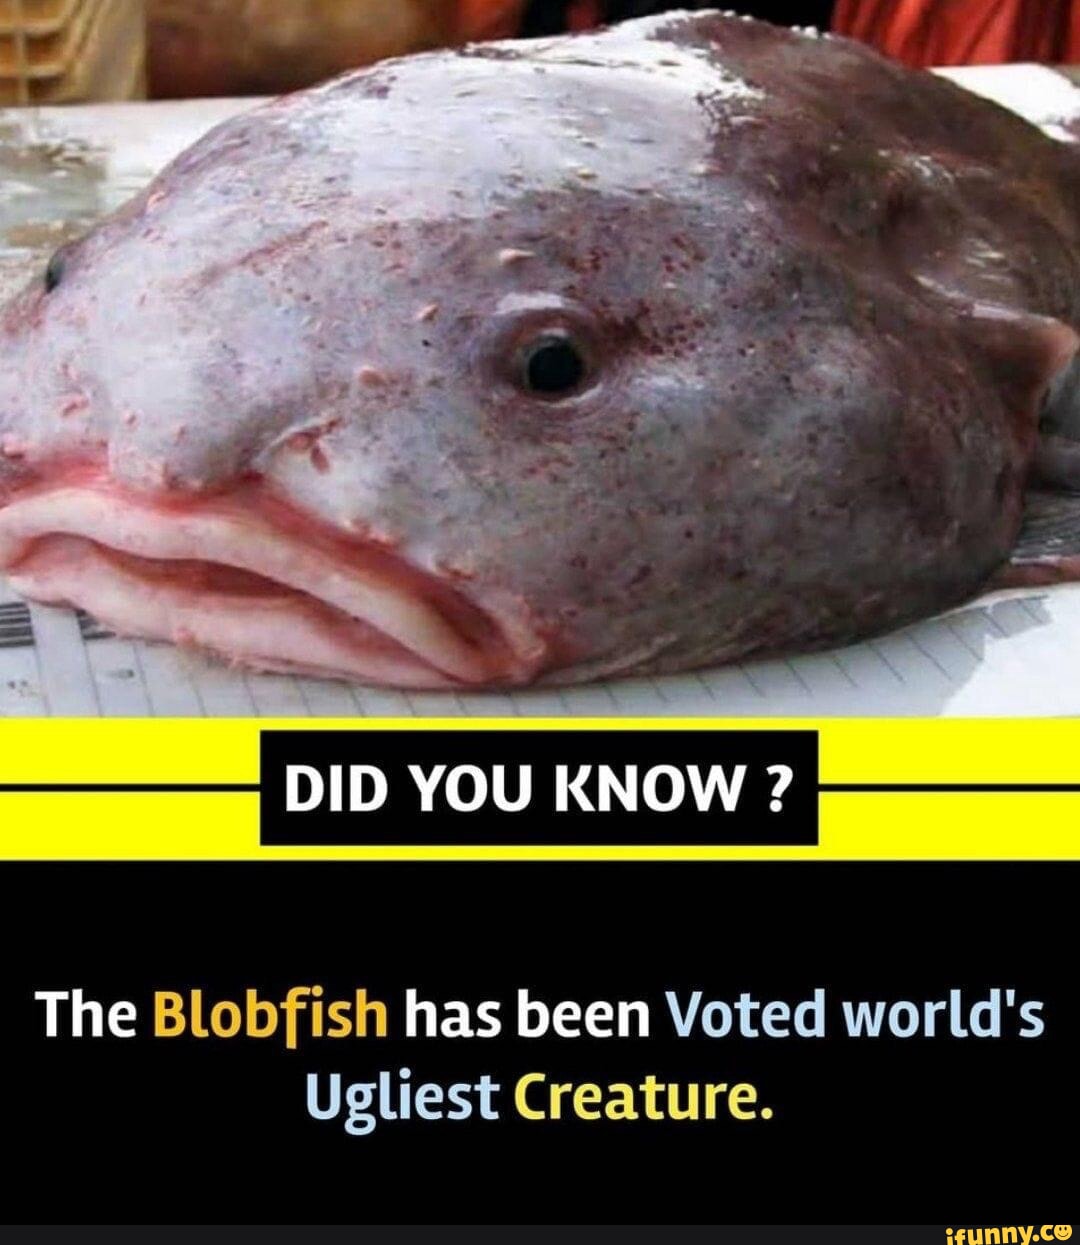 Blobfish in their Blobfish decompressed natural environment: on land and  also dead: - iFunny Brazil